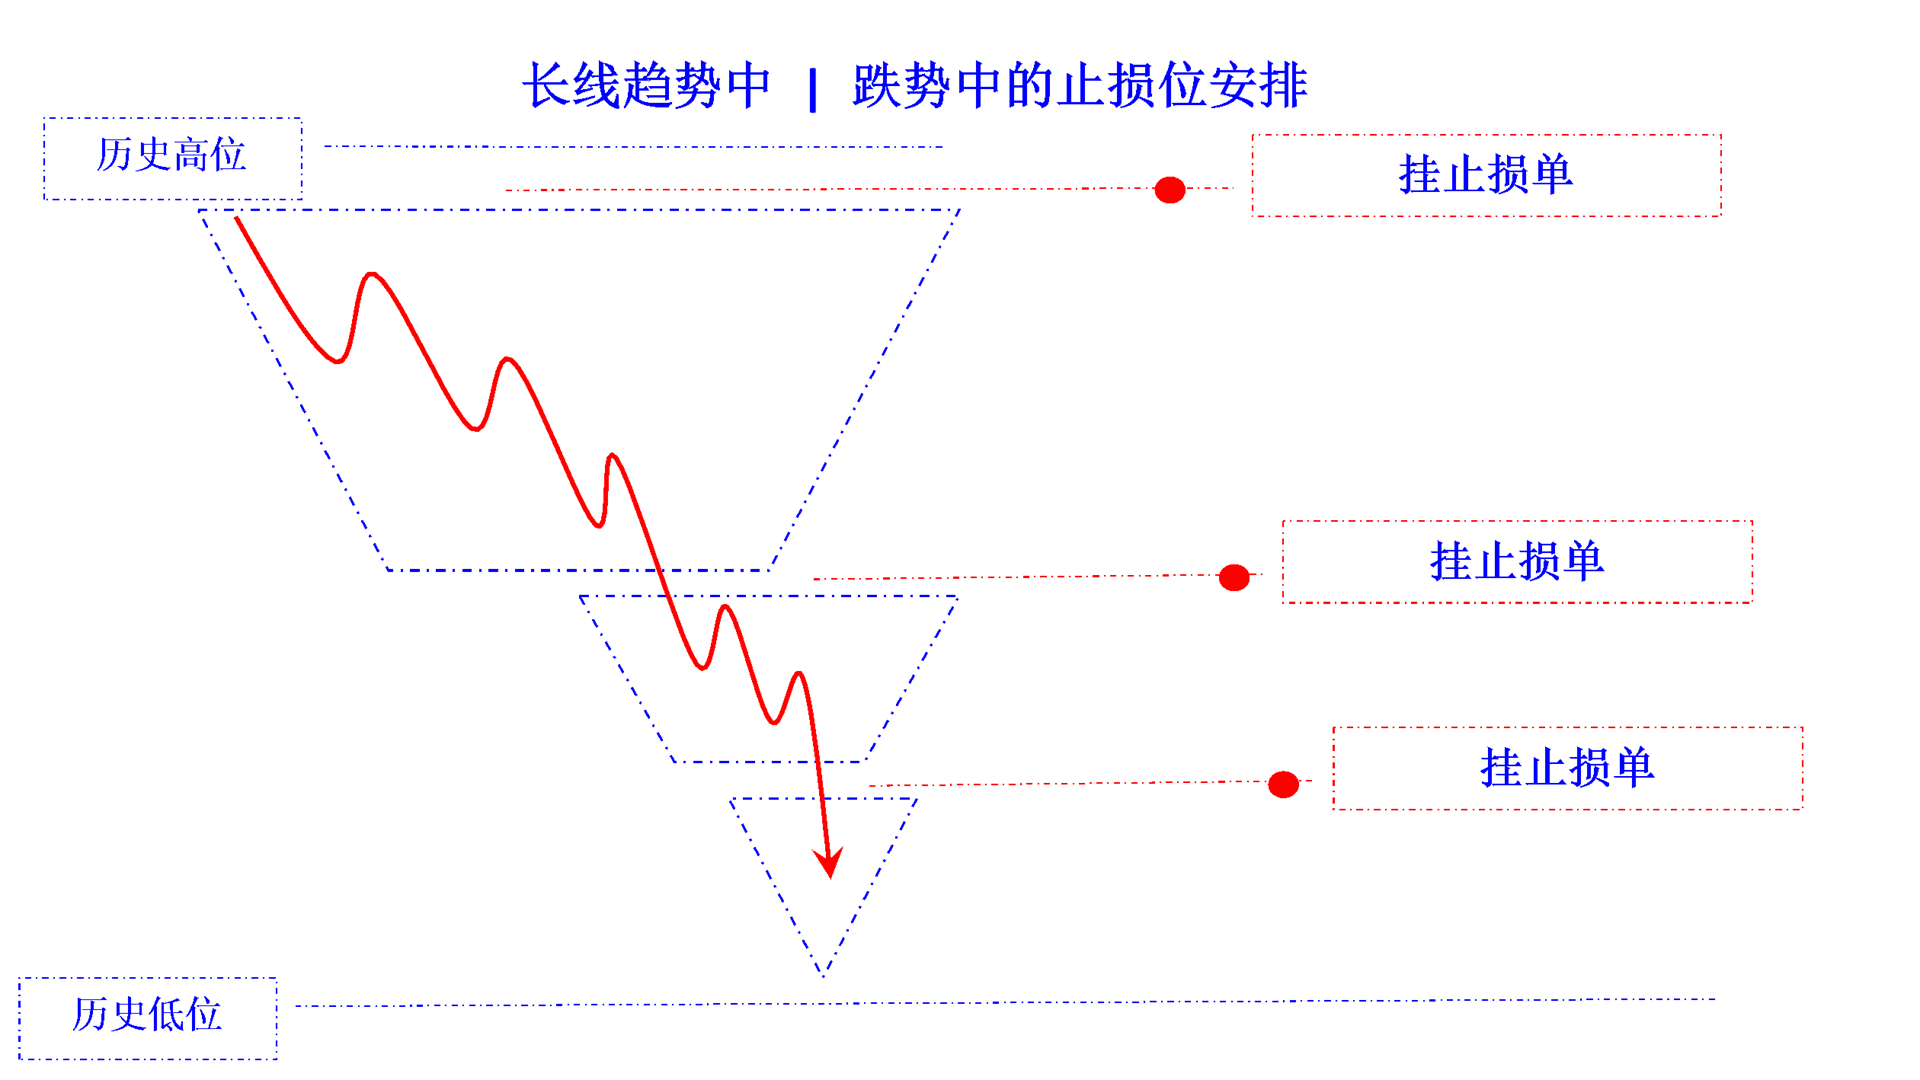 position stop loss in falling trend long cn